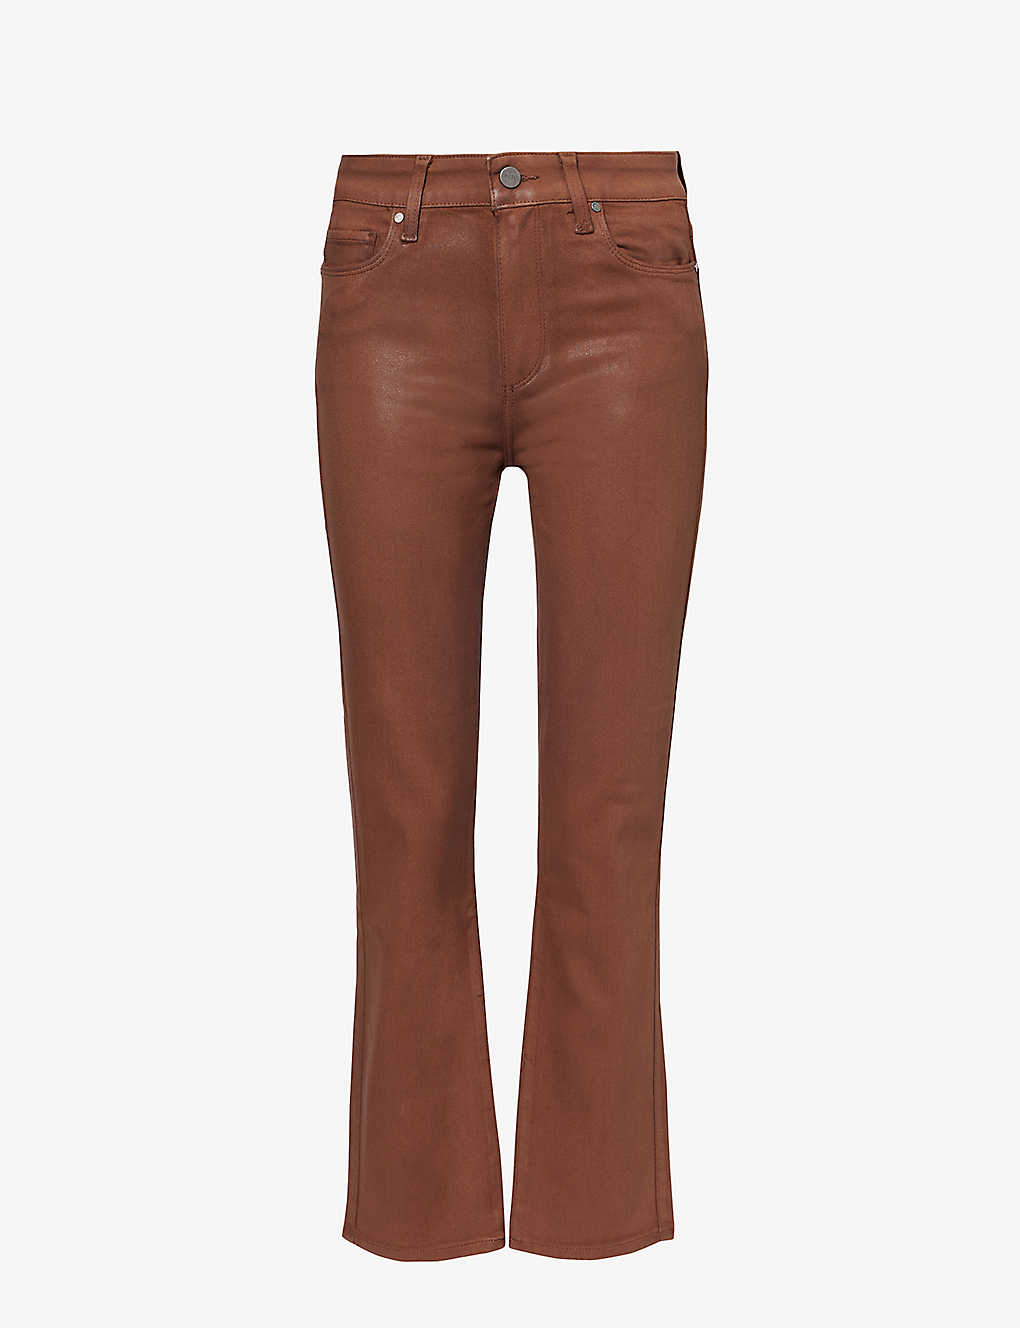 Shop Paige Womens Cognac Luxe Coating Cindy Brand-patch Low-rise Tapered-leg Stretch-denim Jeans